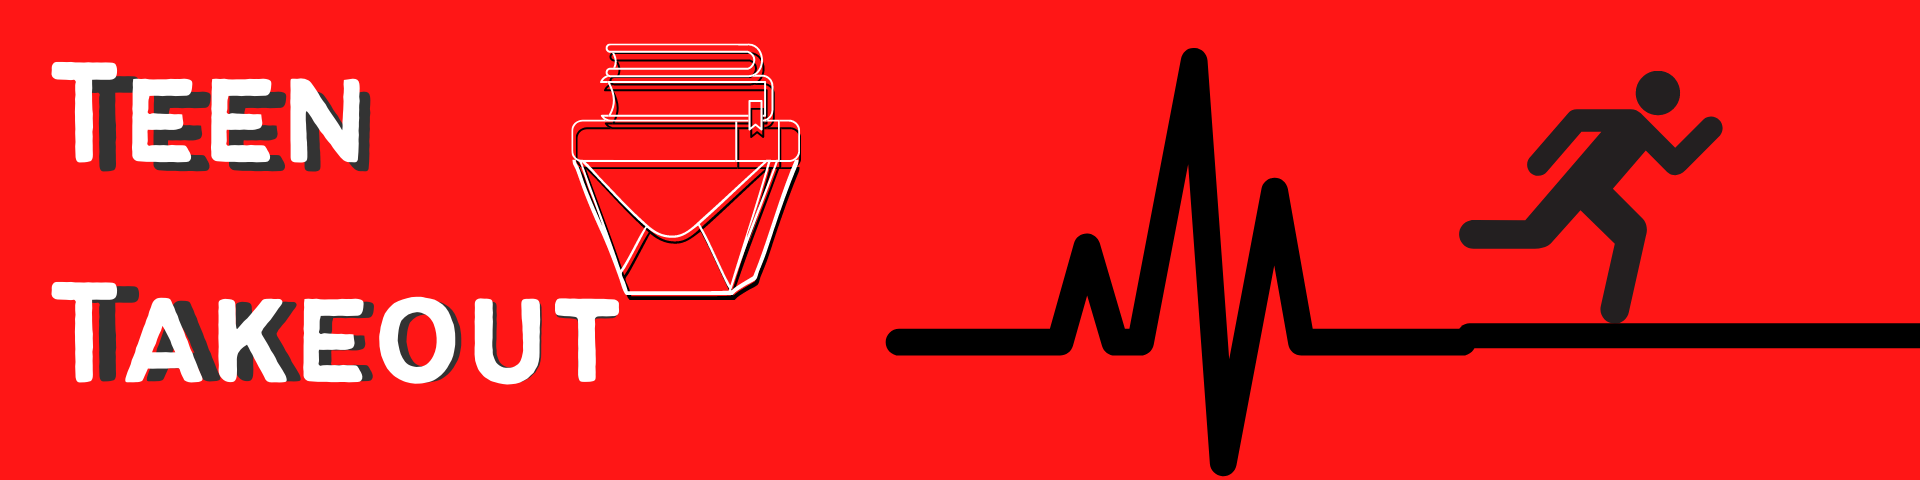 Teen Takout in white text on red, with a stick figure running away on an EKG heartbeat line